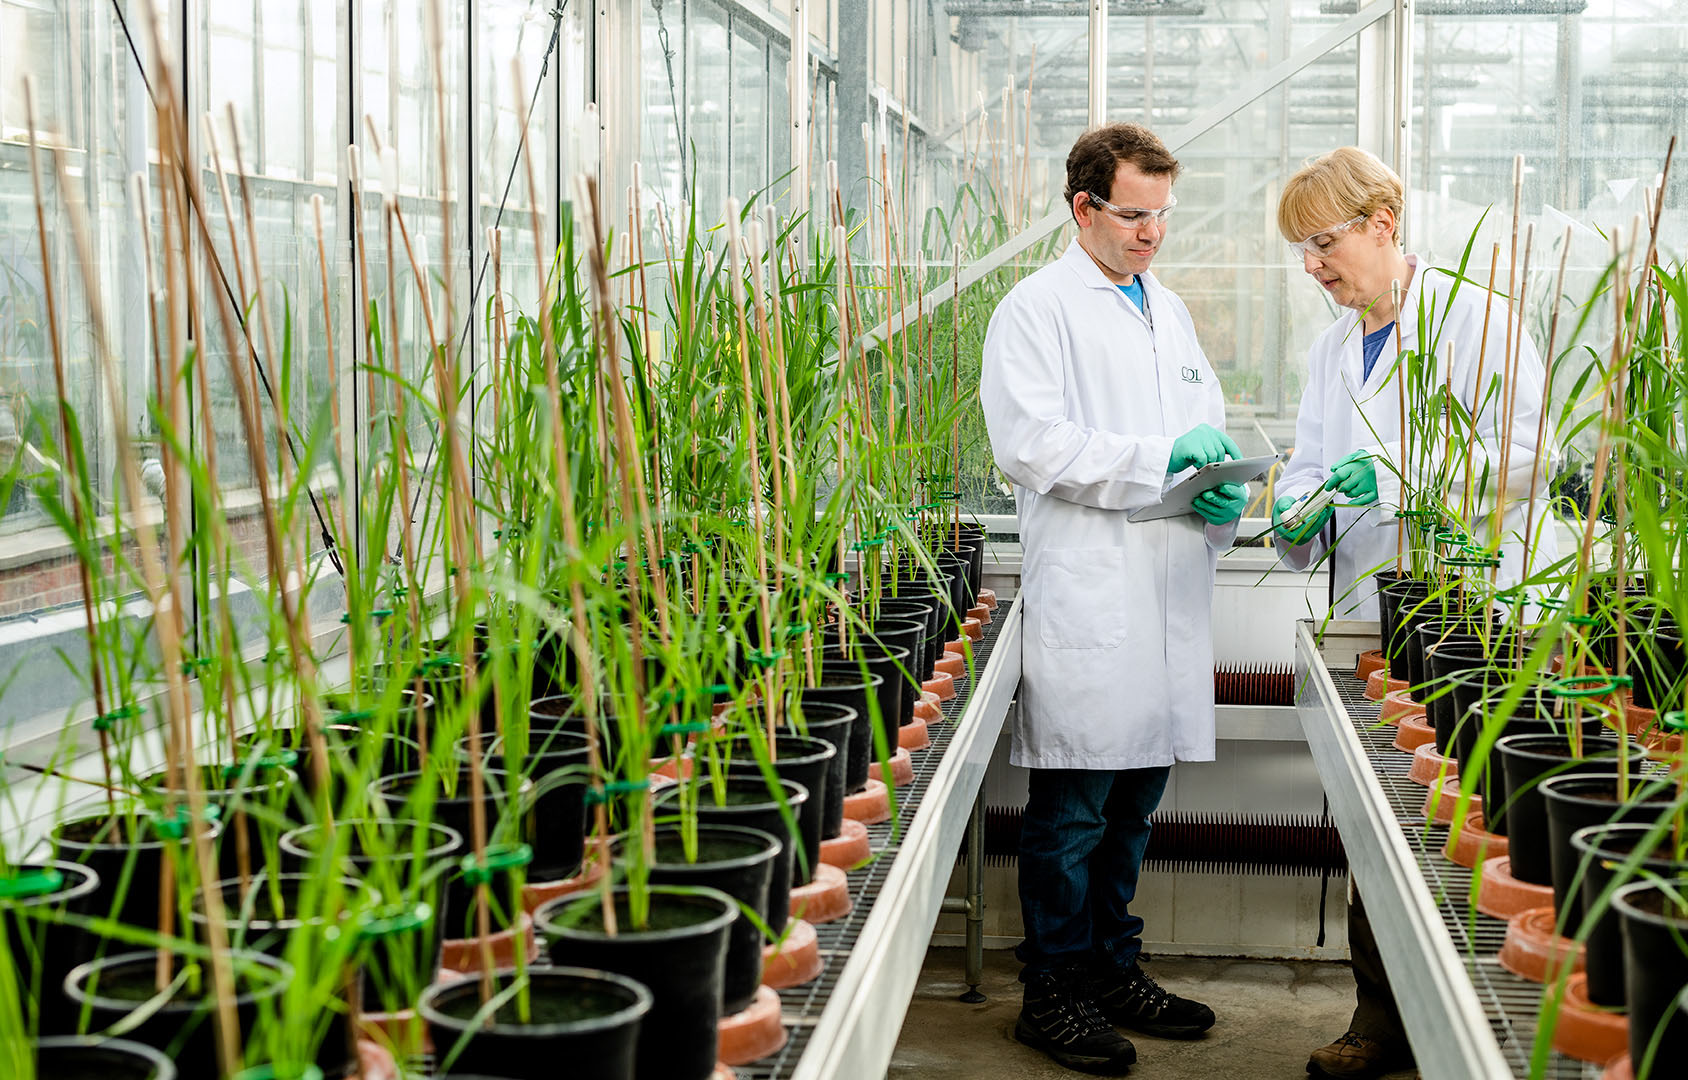 One Male & Female bio scientist discussing results in Industrial greenhouse 